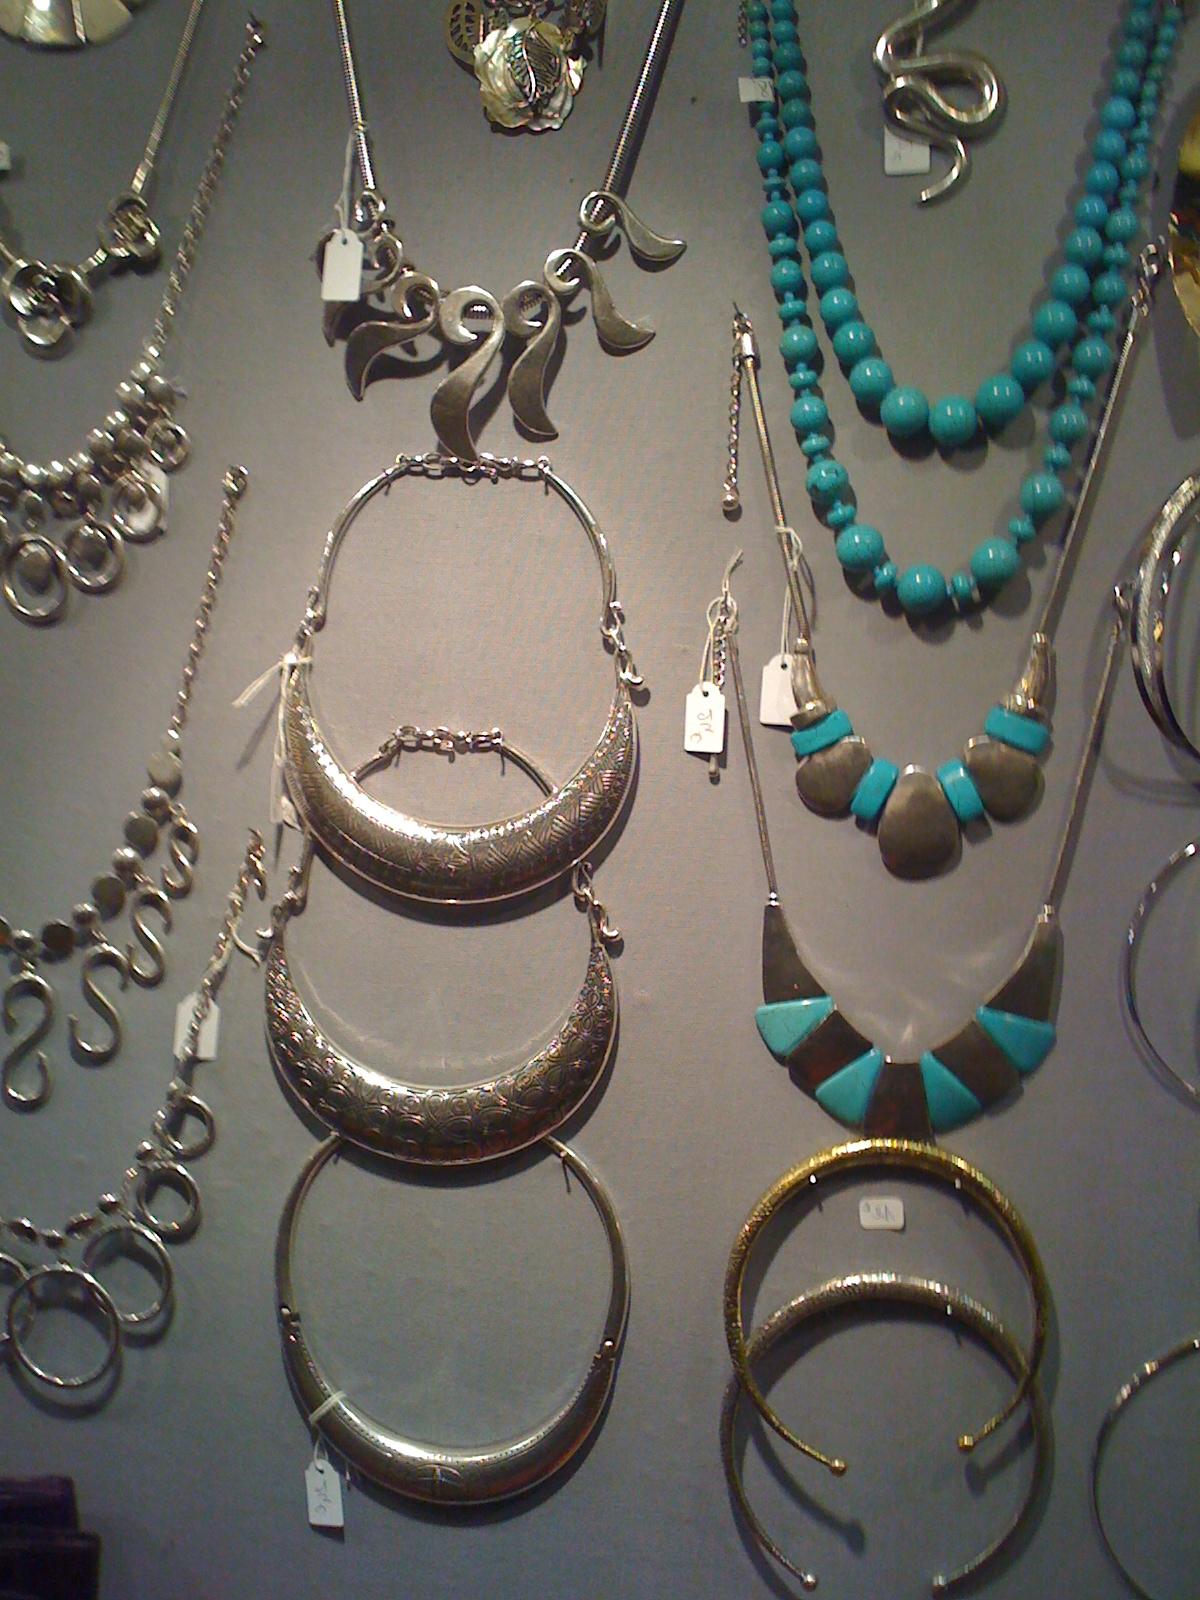 Cool collar necklaces